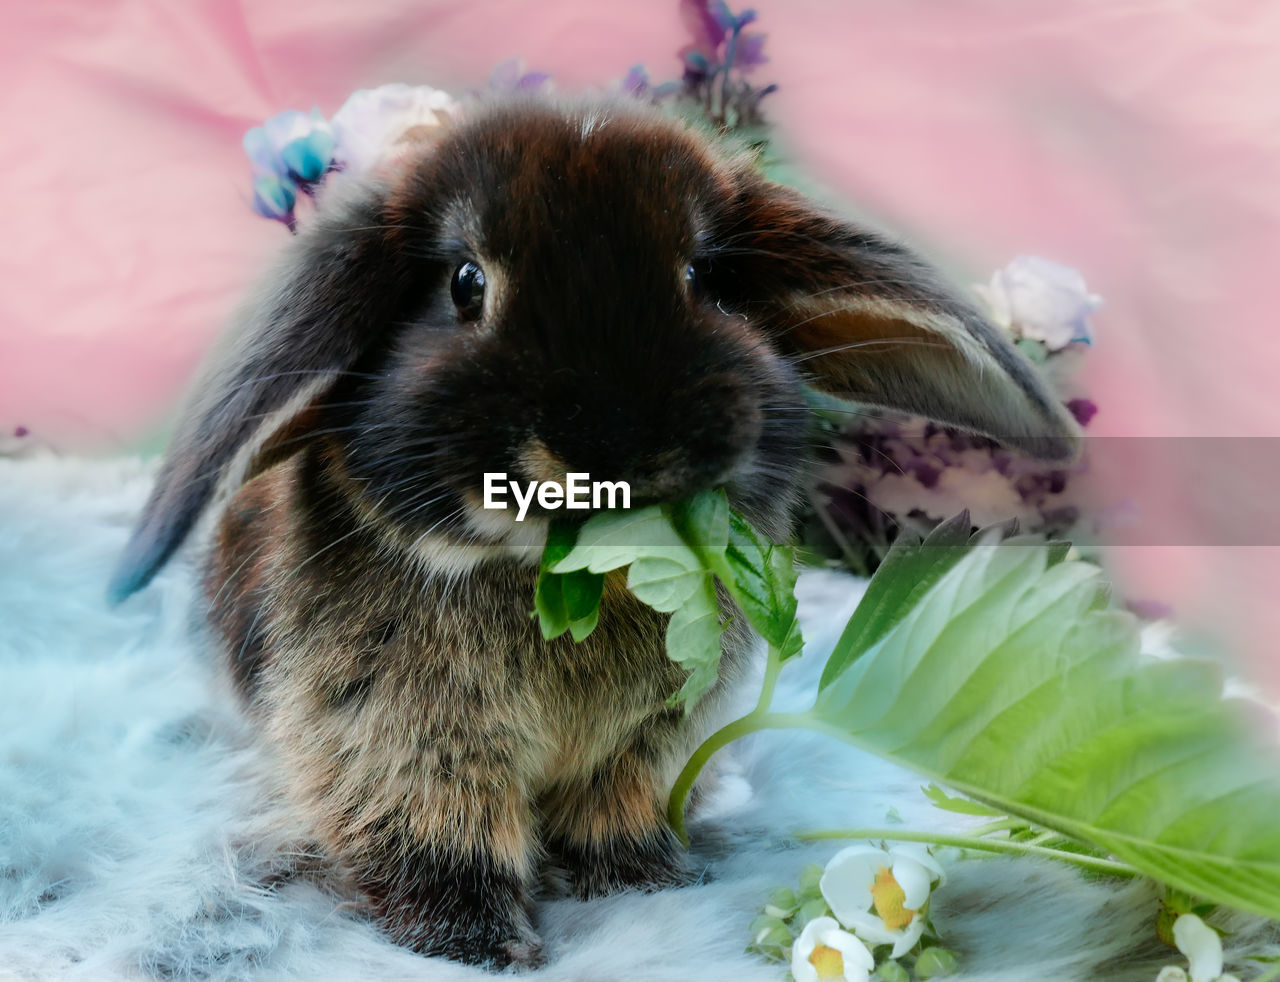 pet, animal, animal themes, mammal, one animal, whiskers, domestic animals, guinea pig, rabbit, domestic rabbit, rodent, rabbits and hares, cute, no people, close-up, animal wildlife, flower, portrait, hamster, looking at camera, nature, plant